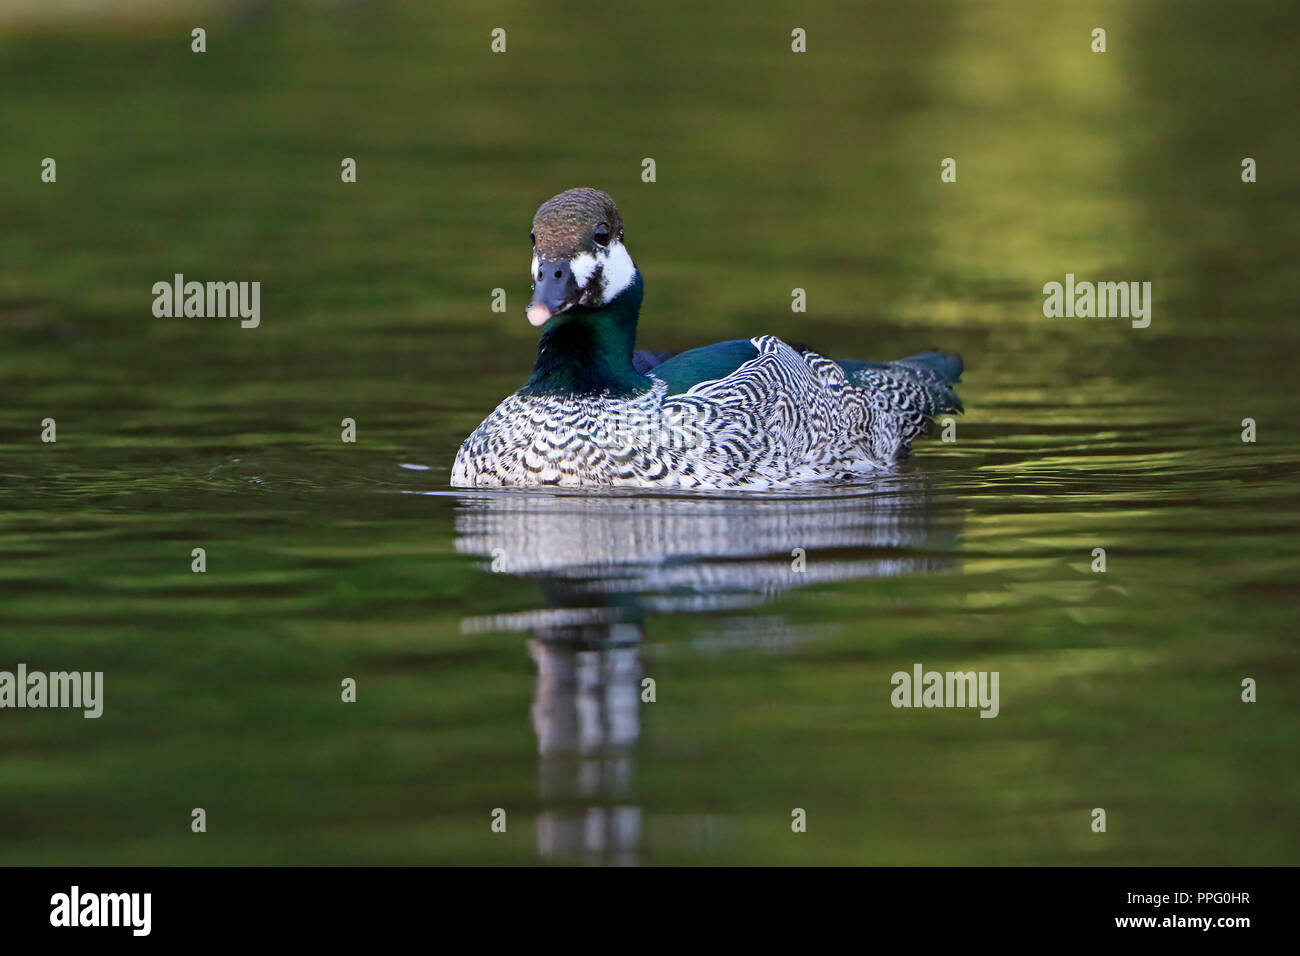 Male Green Pygmy Goose Port Moresby Papua New Guinea Stock Photo